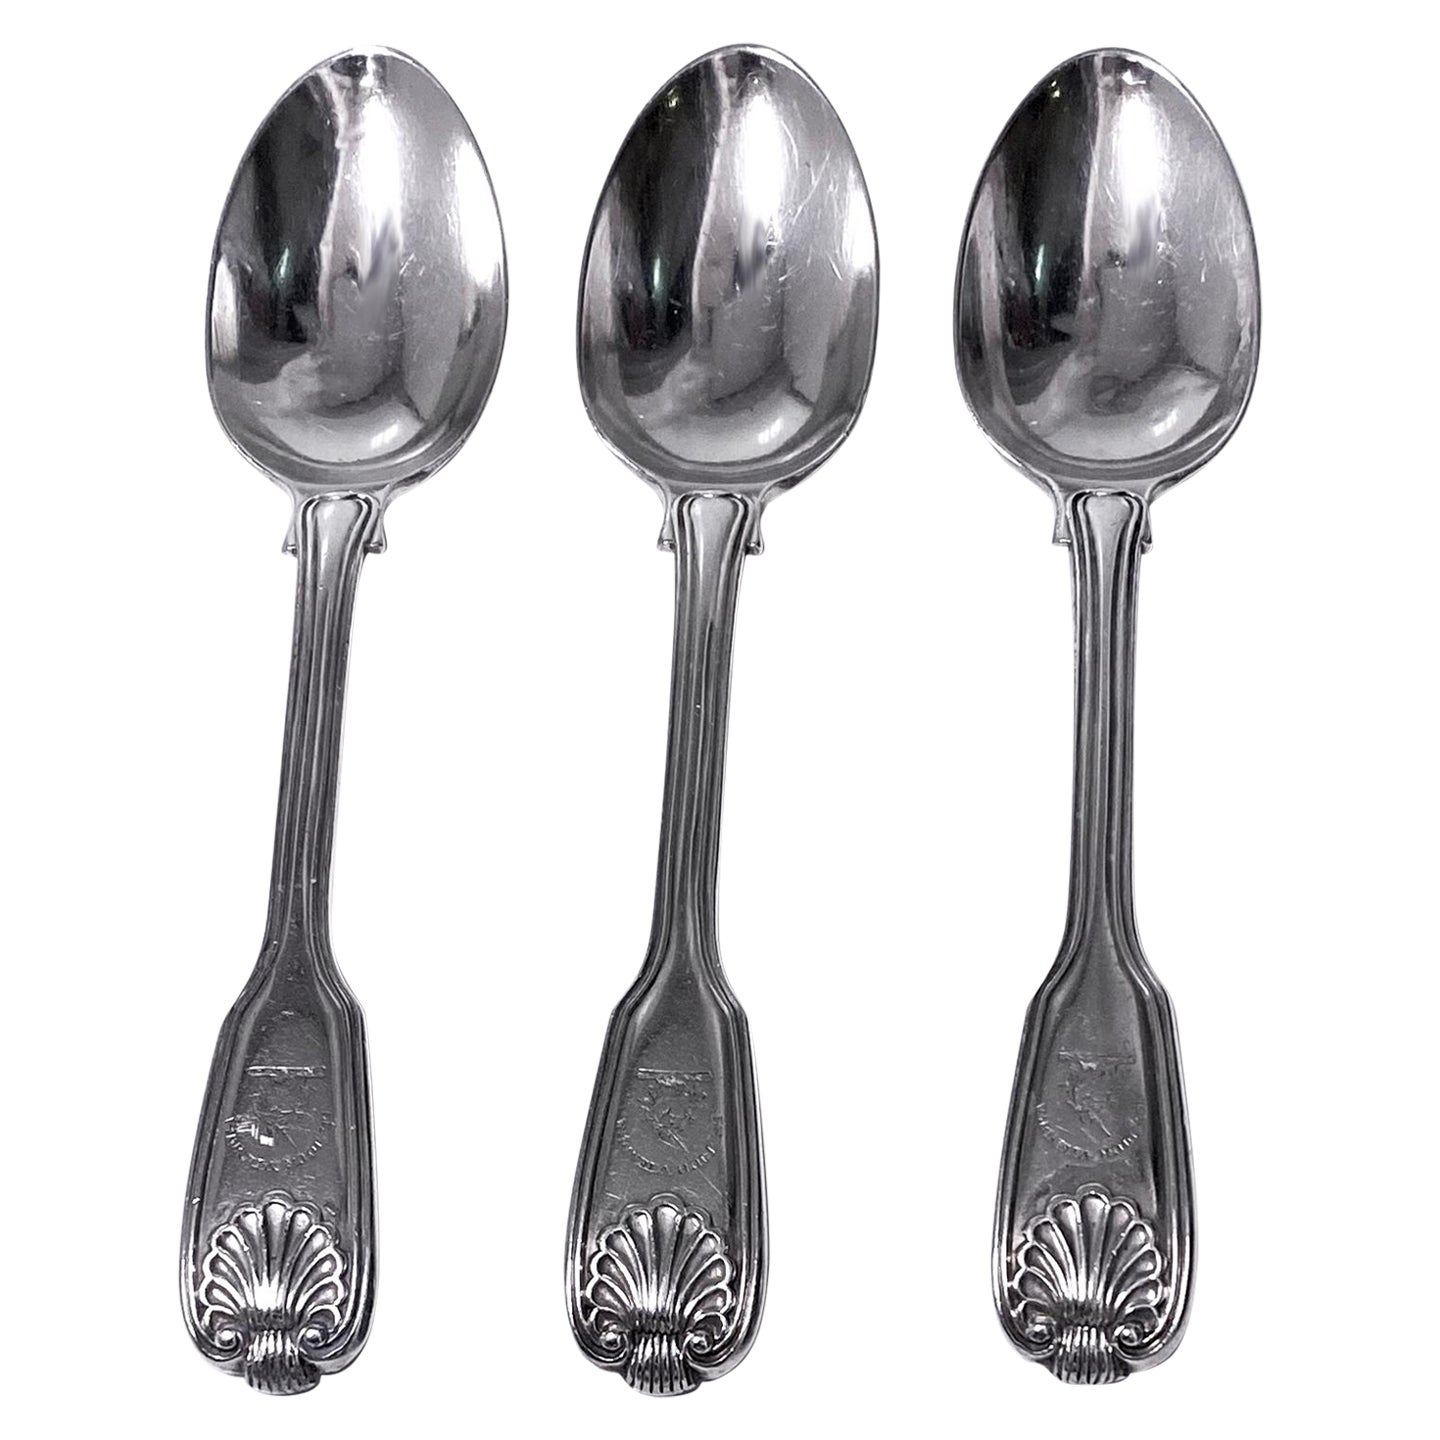 Three Fiddle Thread Shell large Teaspoons London 1836 Mary Chawner For Sale